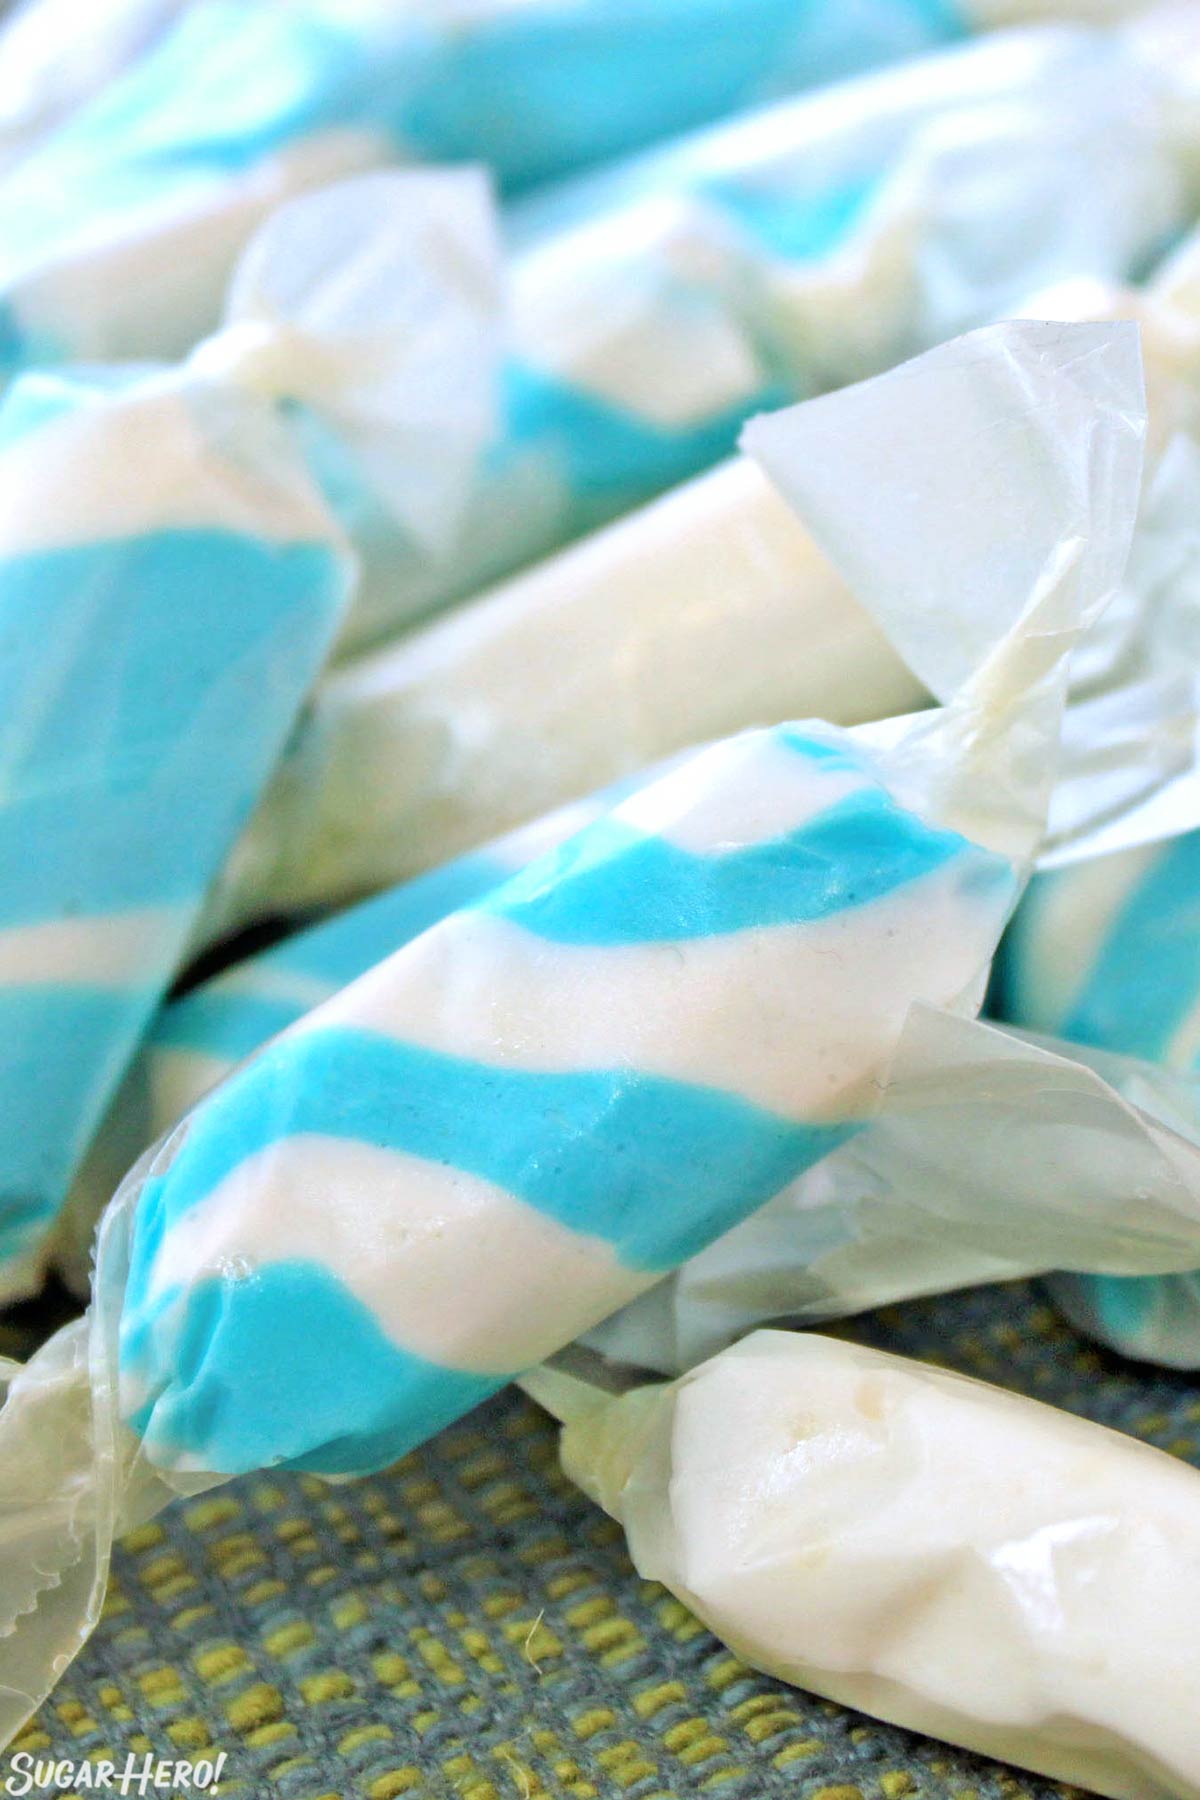 Close-up of blue and white striped saltwater taffy.